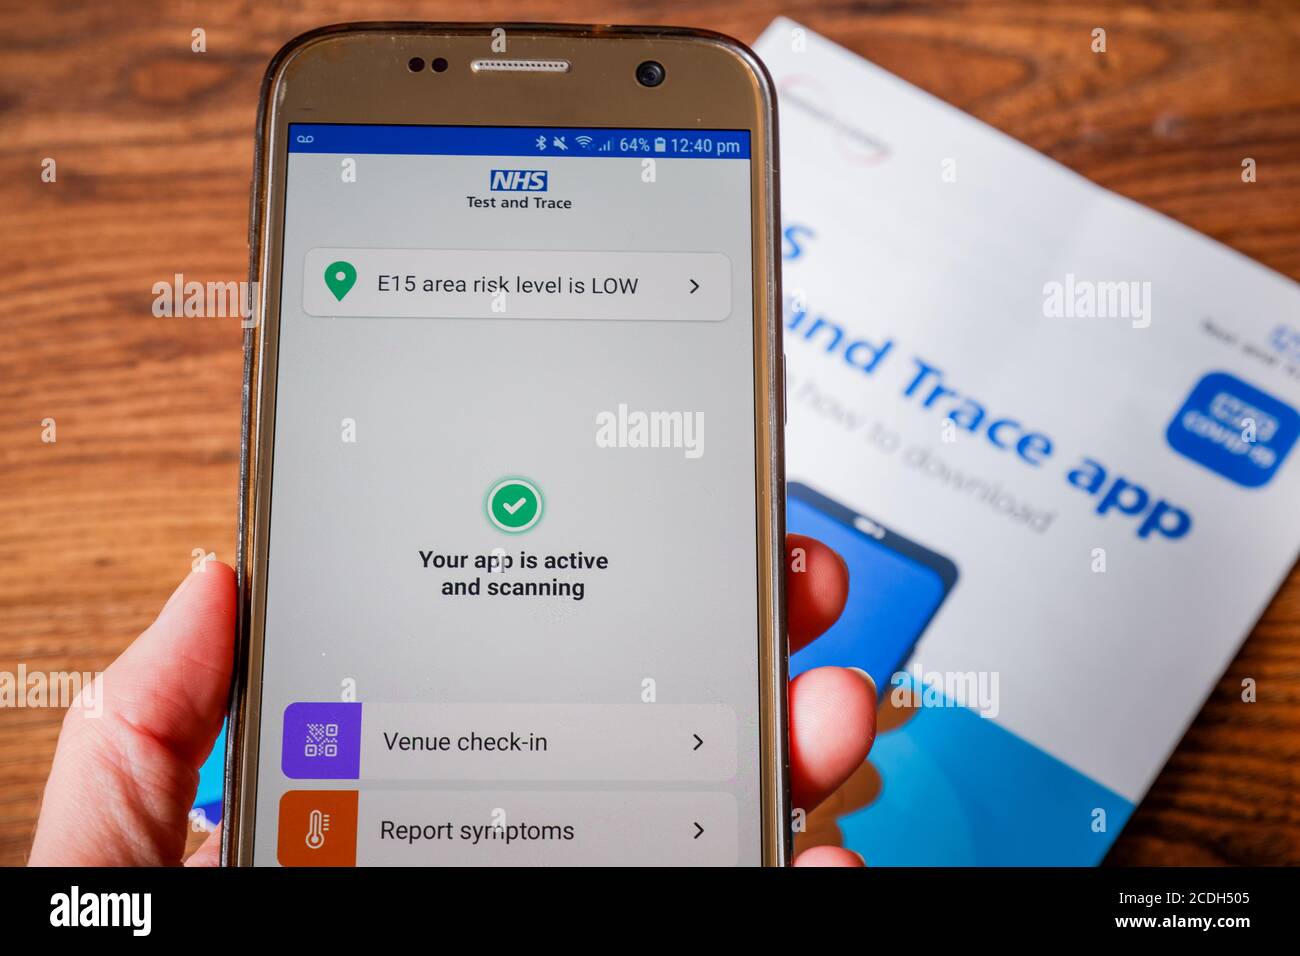 NHS COVID-19 Contact-Tracing /Test and Trace Reporting App auf einem Handy-Bildschirm angezeigt. Stockfoto